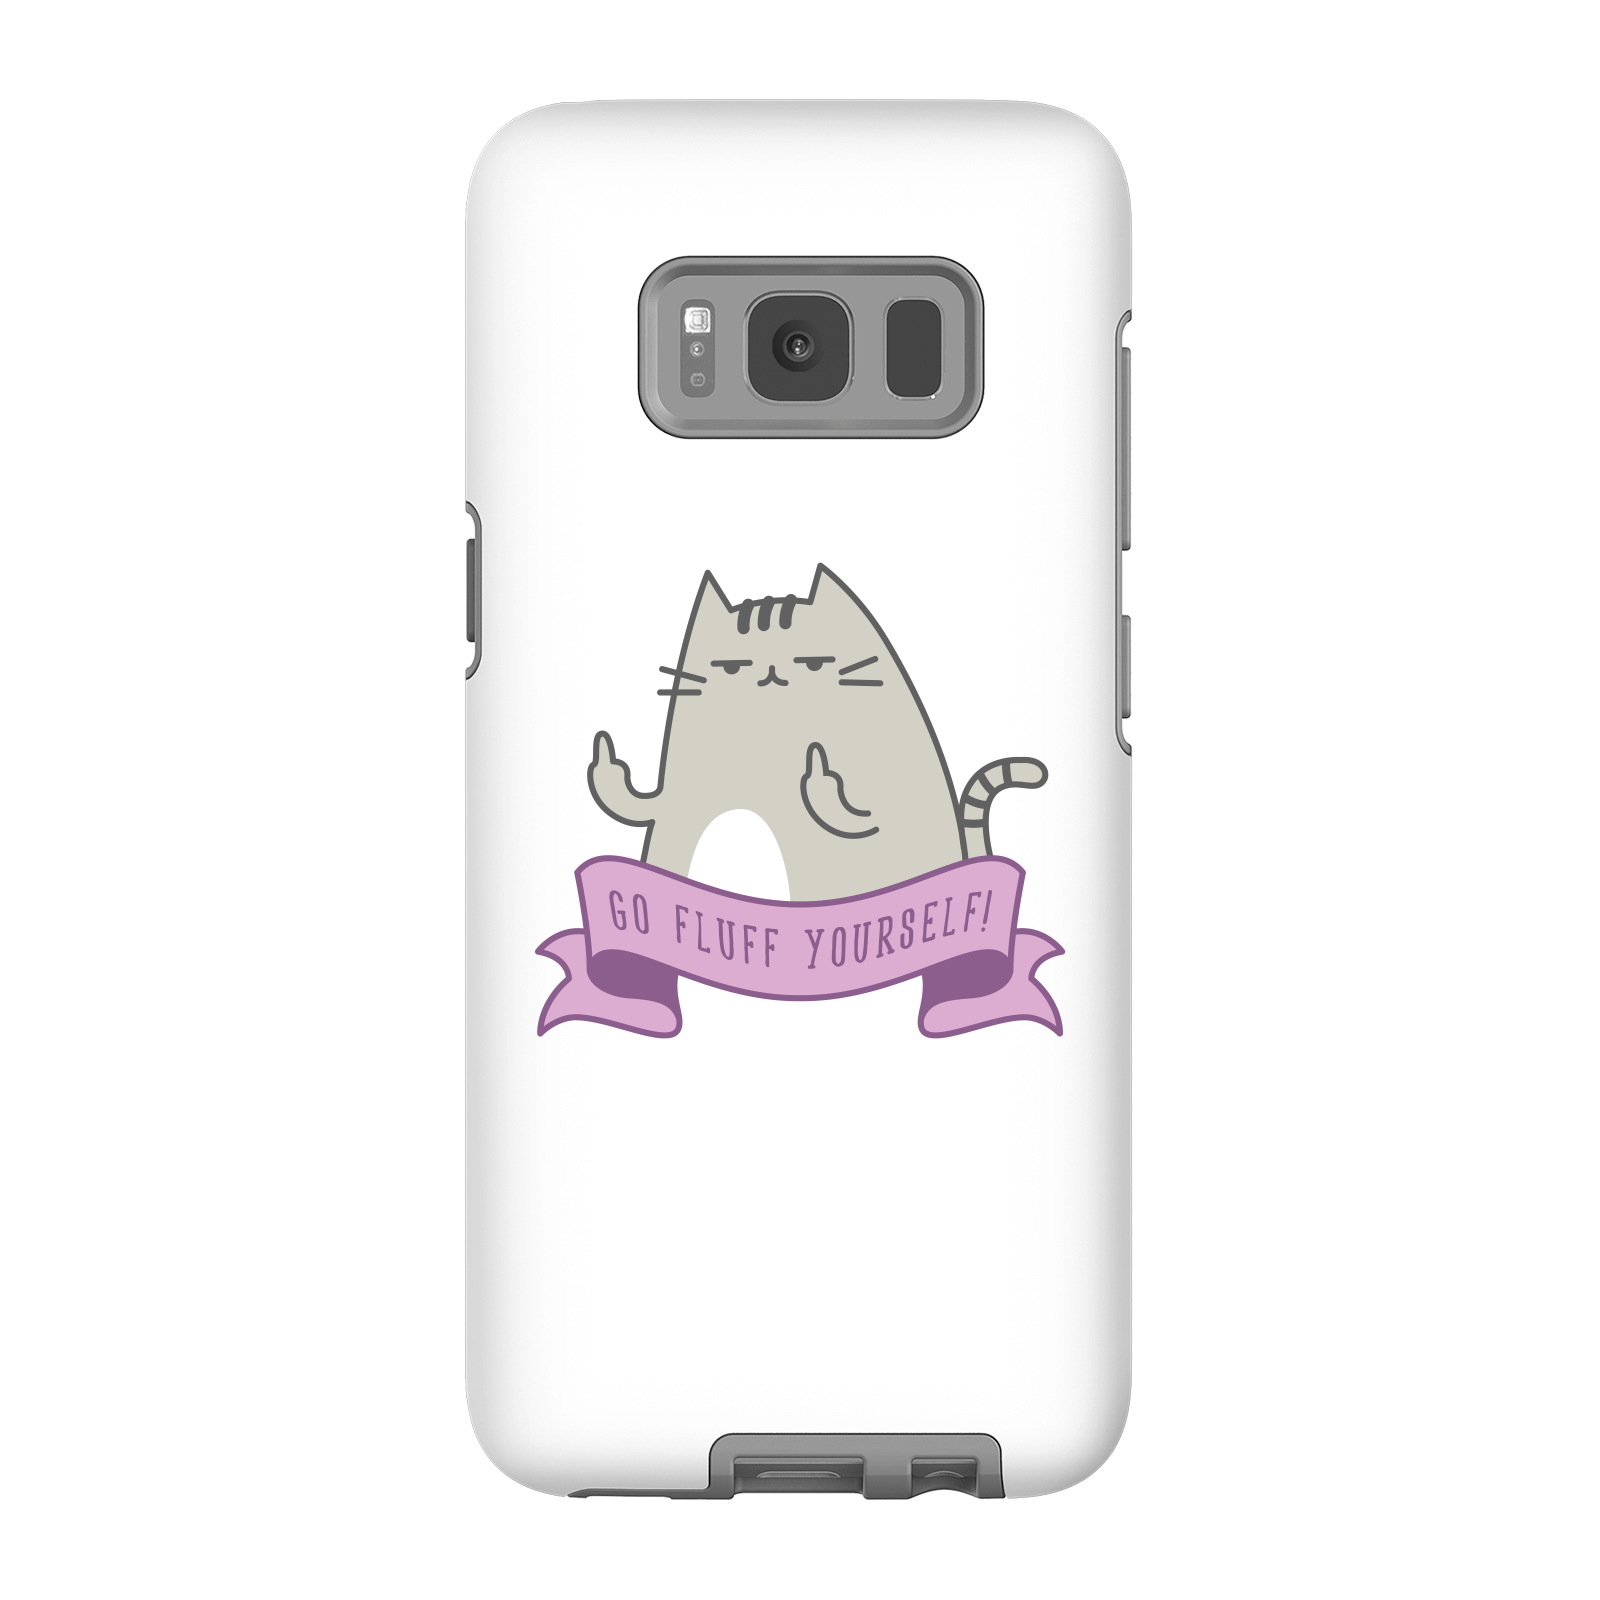 Go Fluff Yourself! Phone Case for iPhone and Android - Samsung S8 - Tough Case - Matte